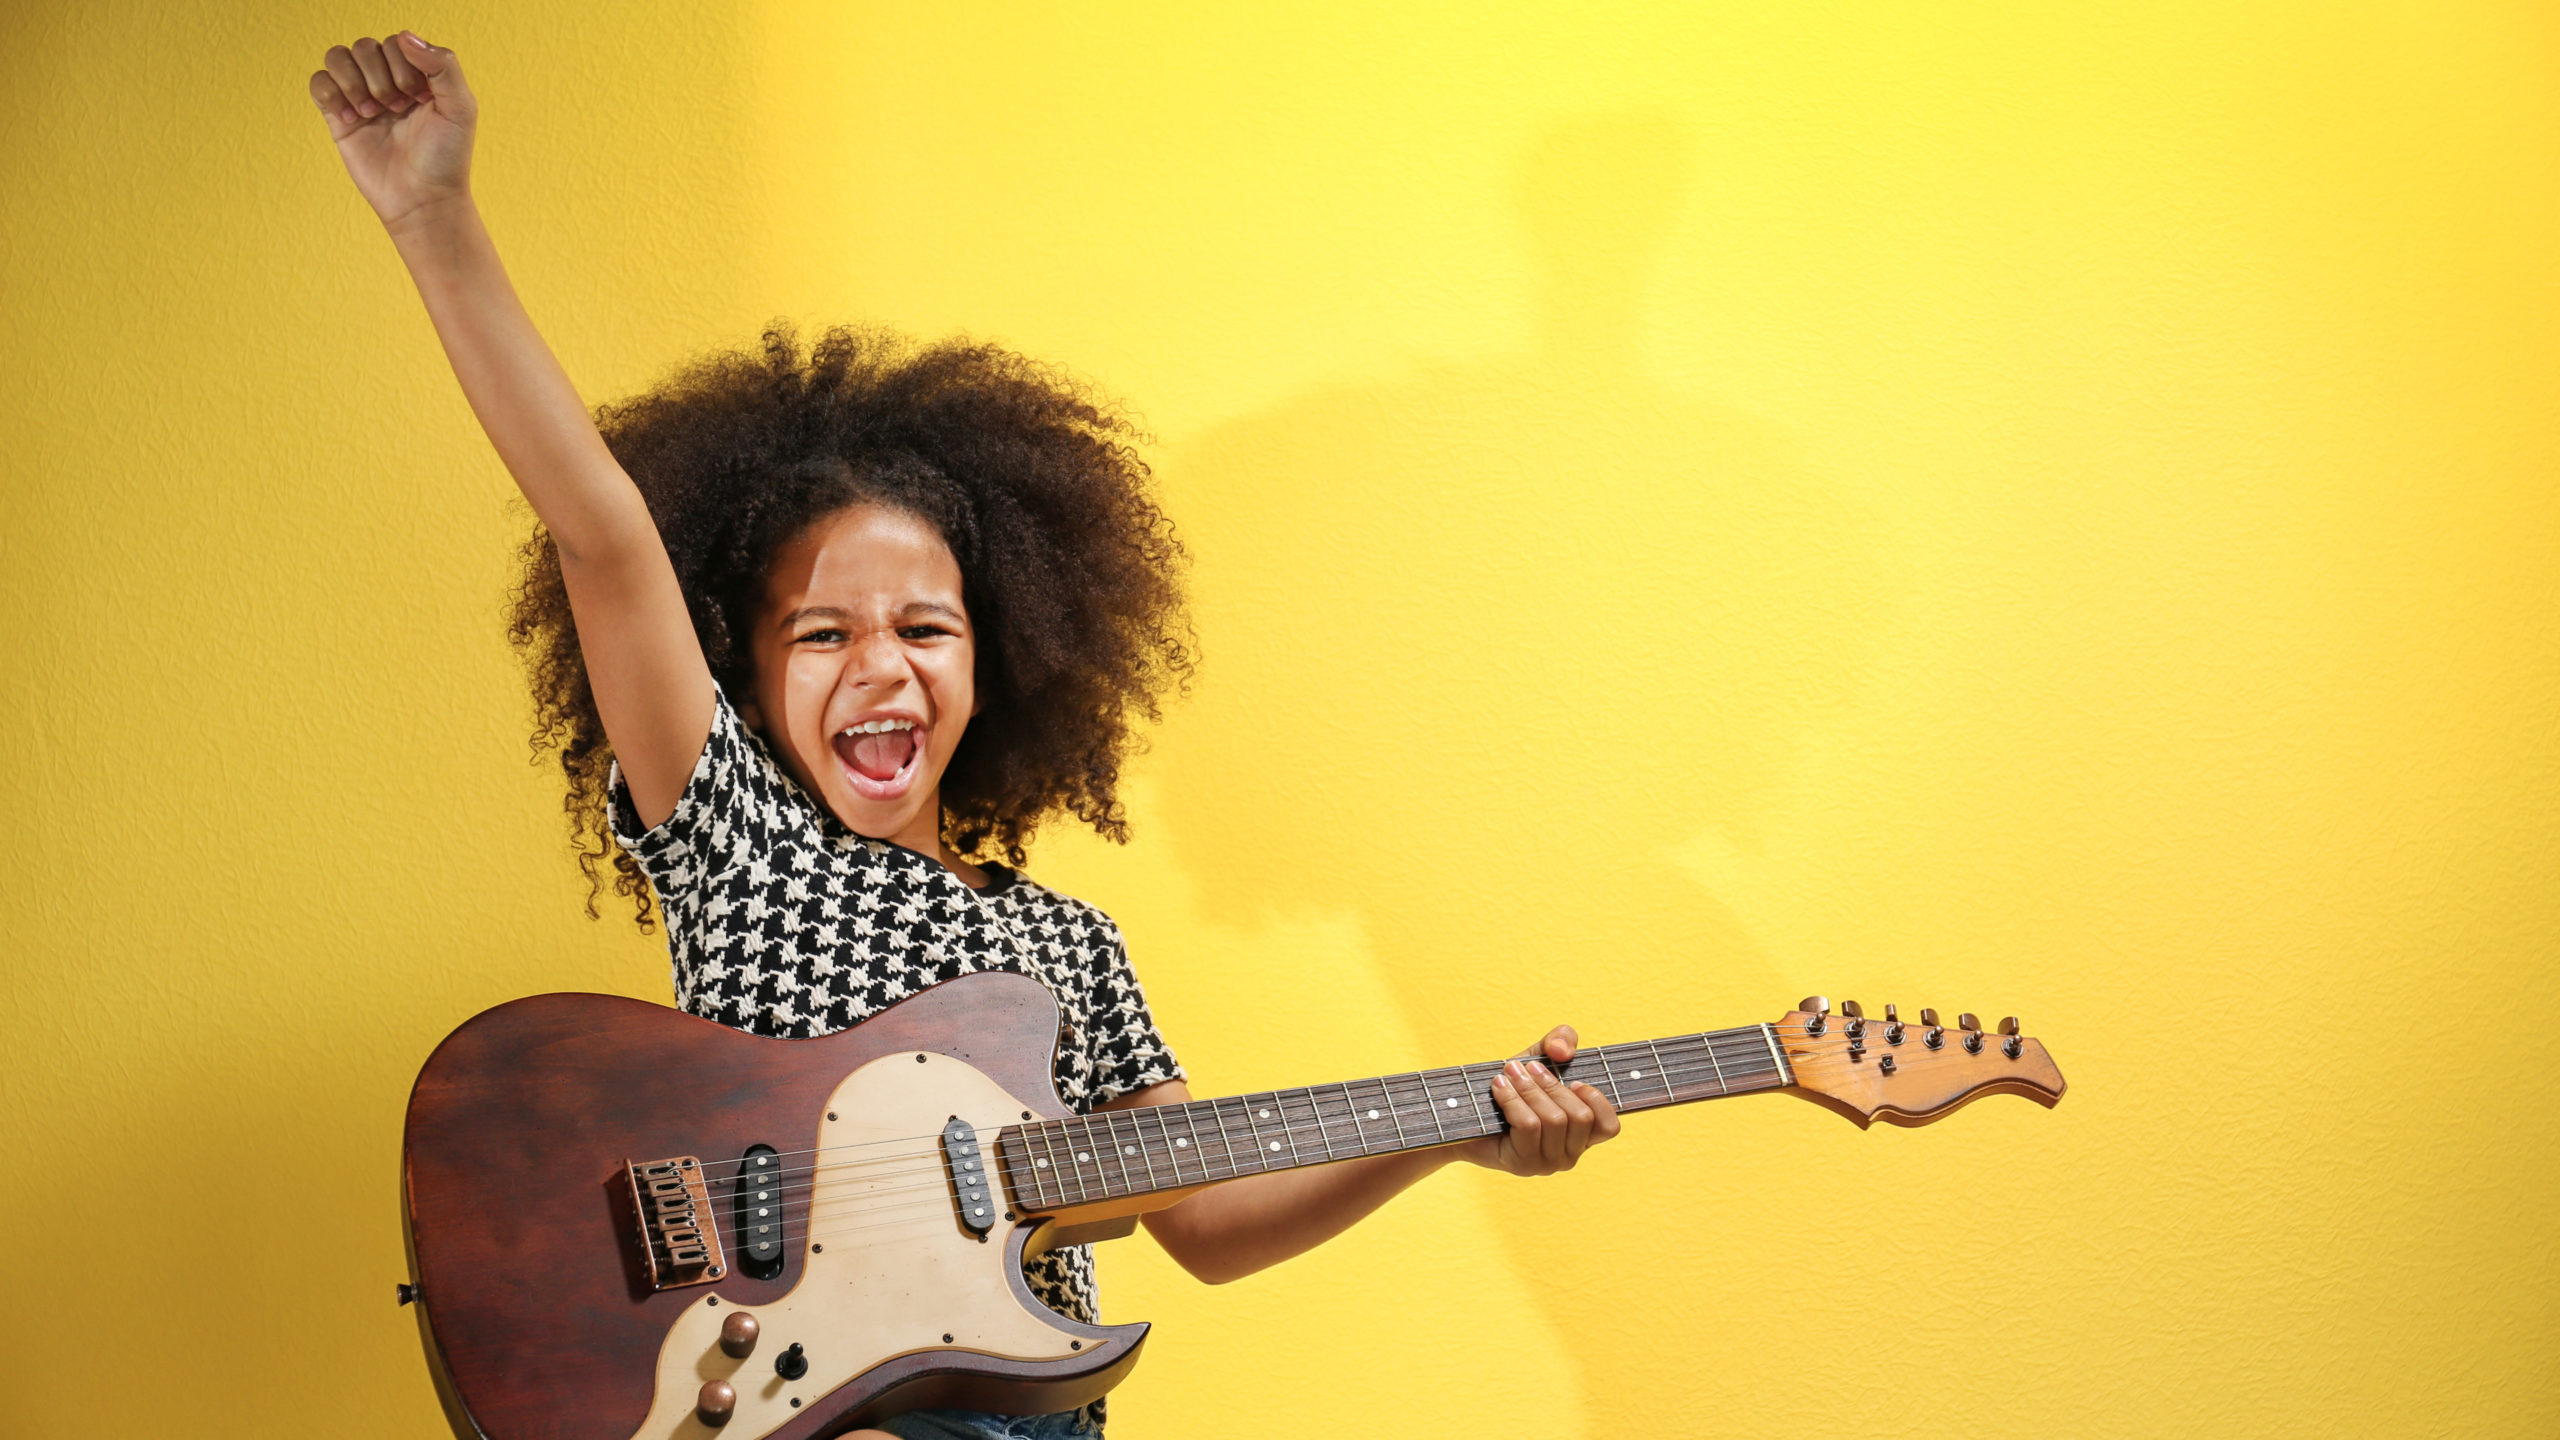 How to Get 3 Months of Free Guitar Lessons from Fender